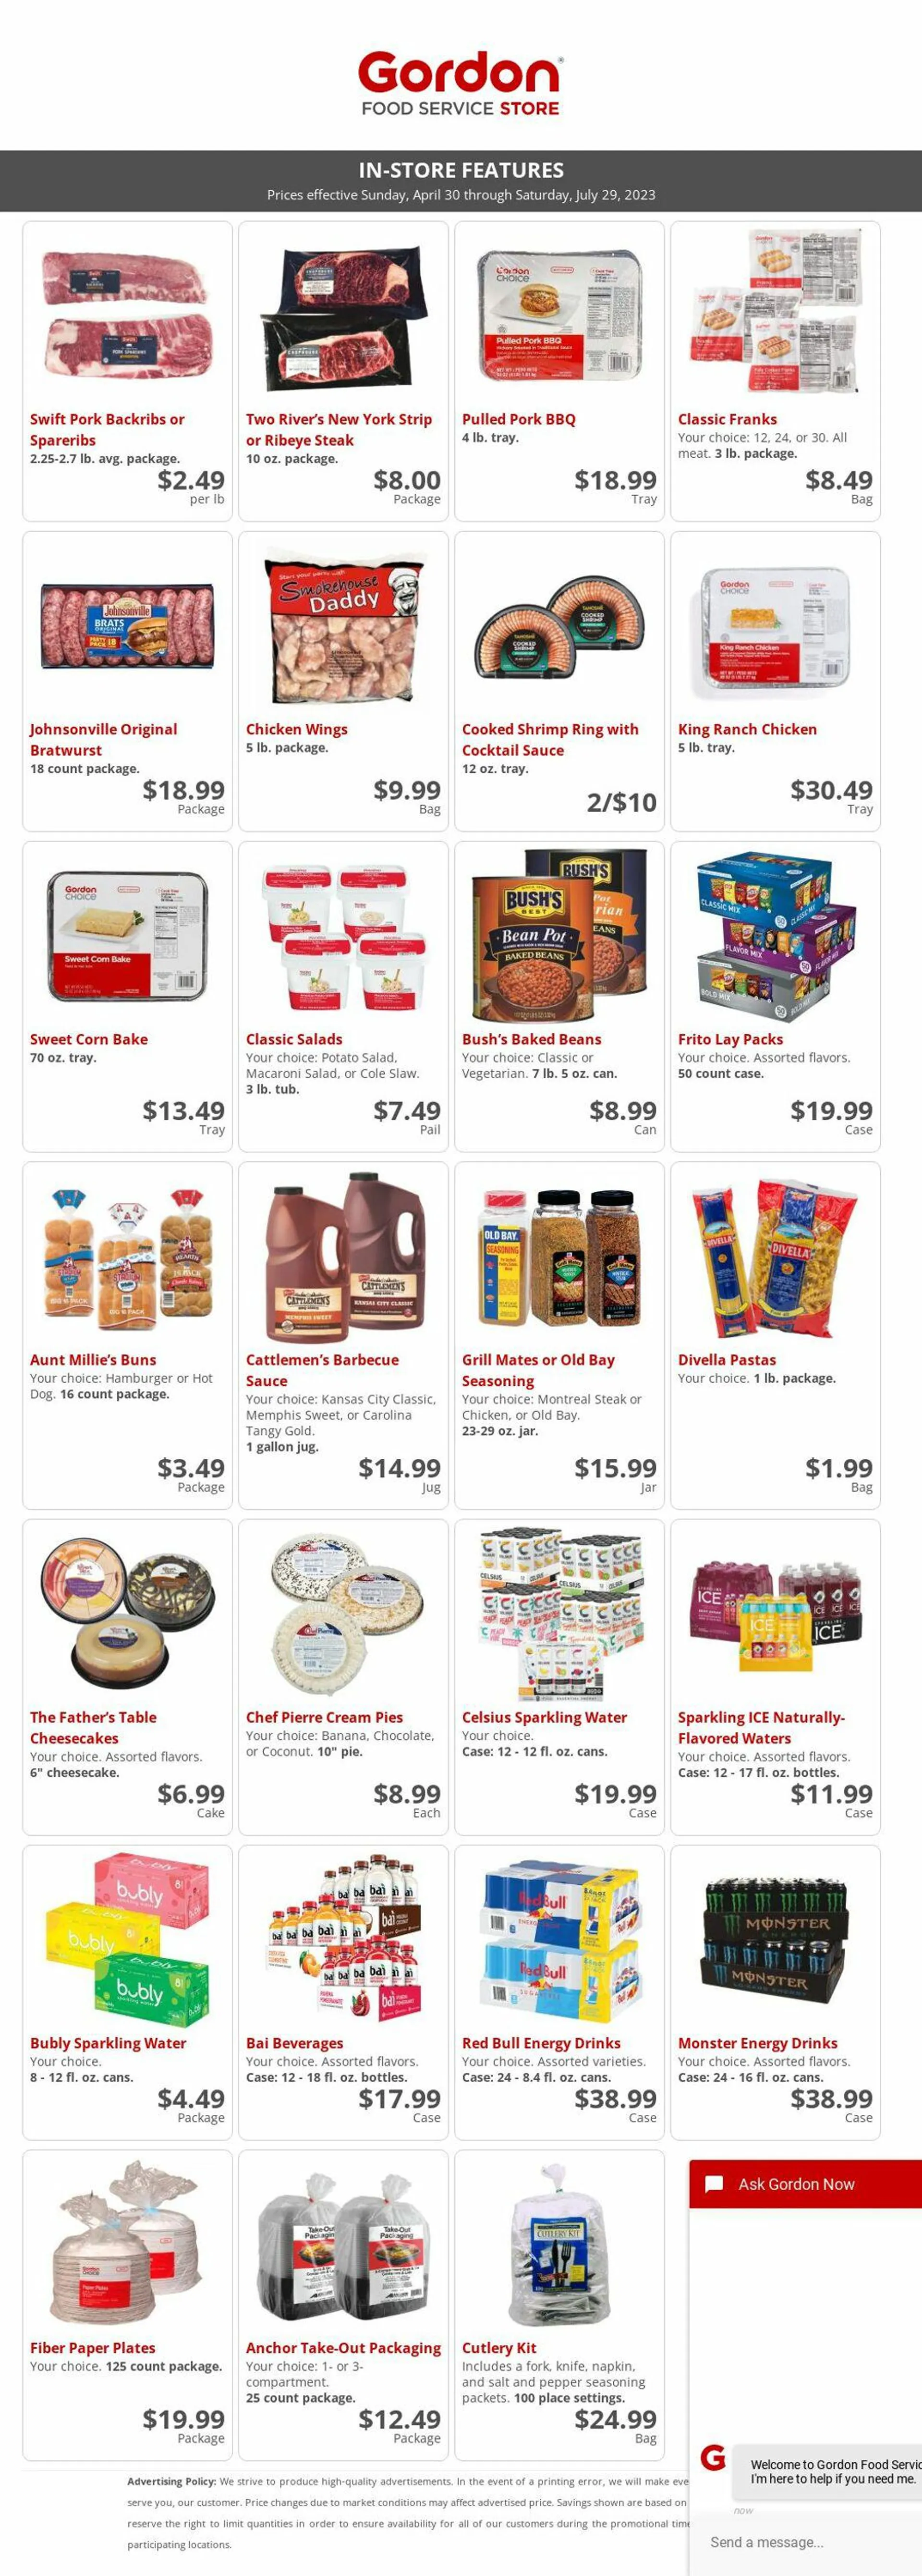 Gordon Food Service Store Current weekly ad - 1